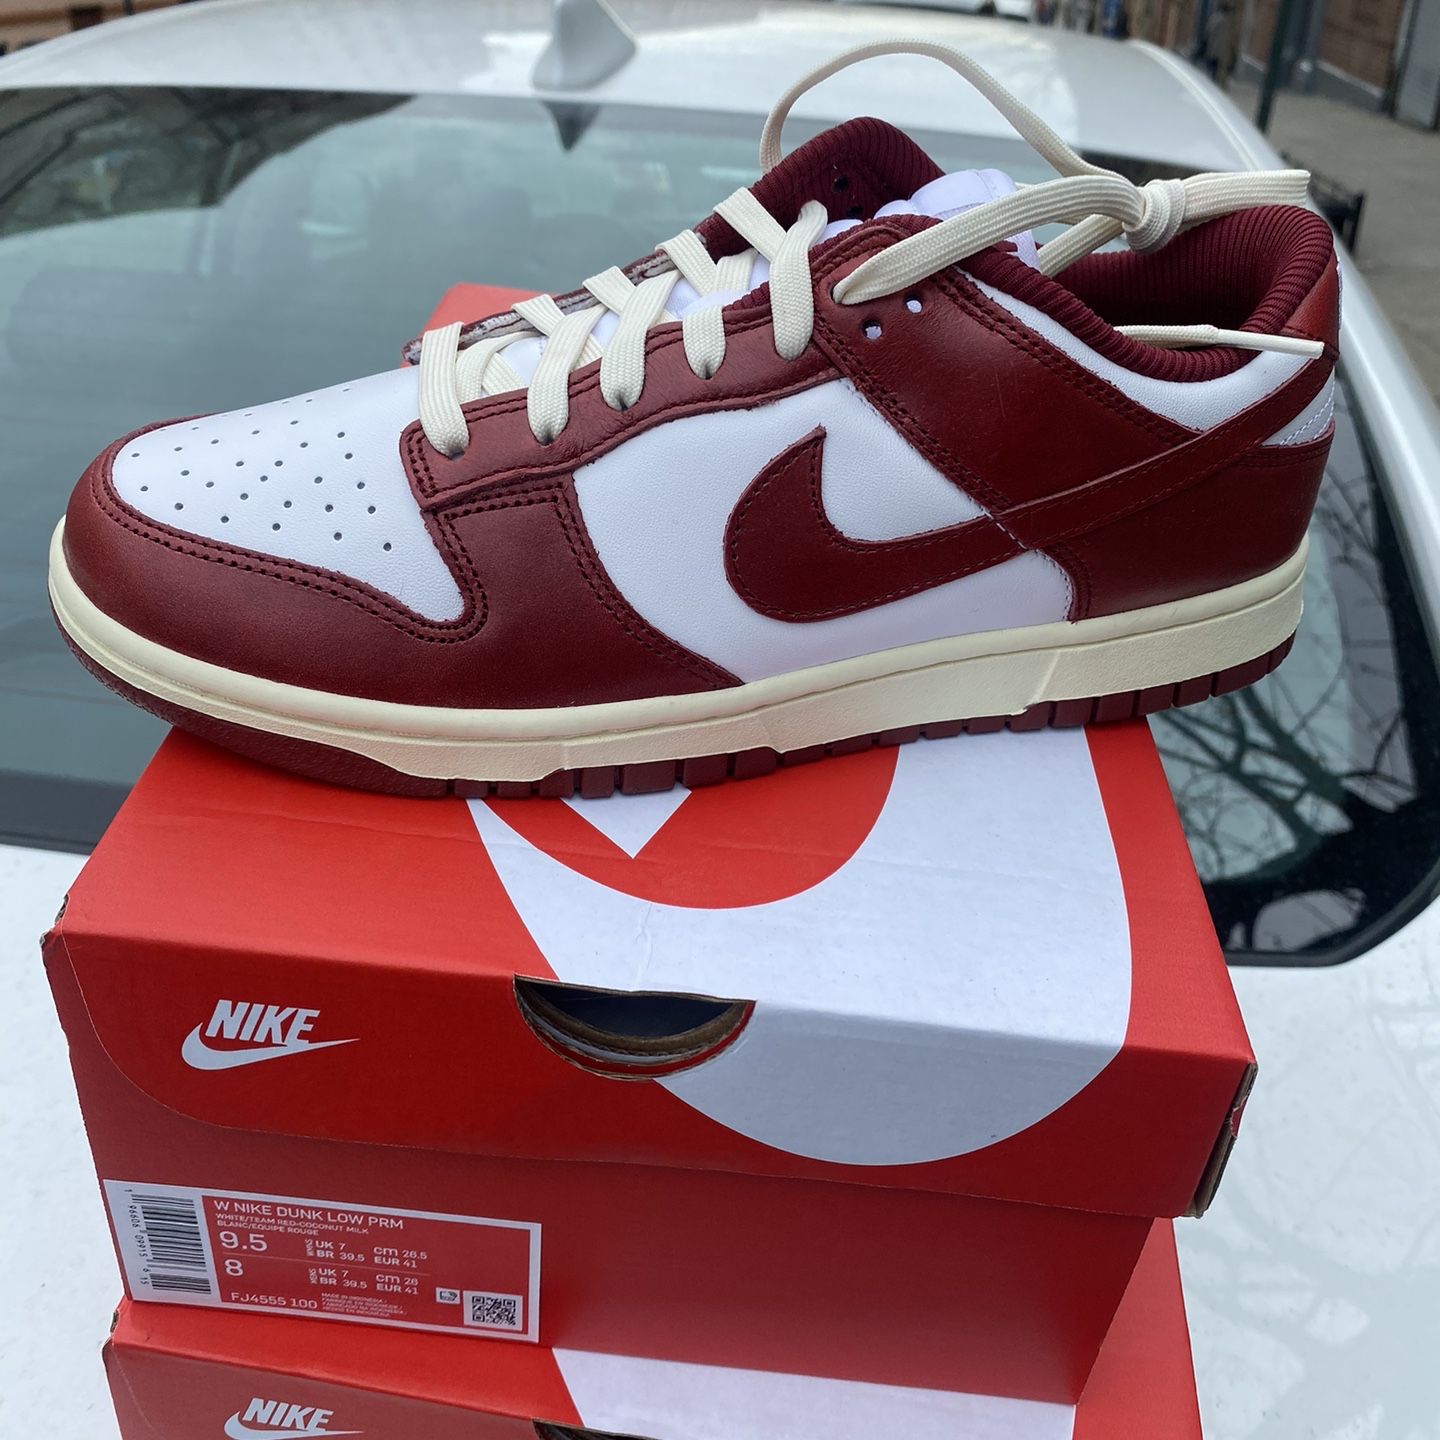 Nike Dunk Team Red Coconut Milk Size 9.5W/8M for Sale in New